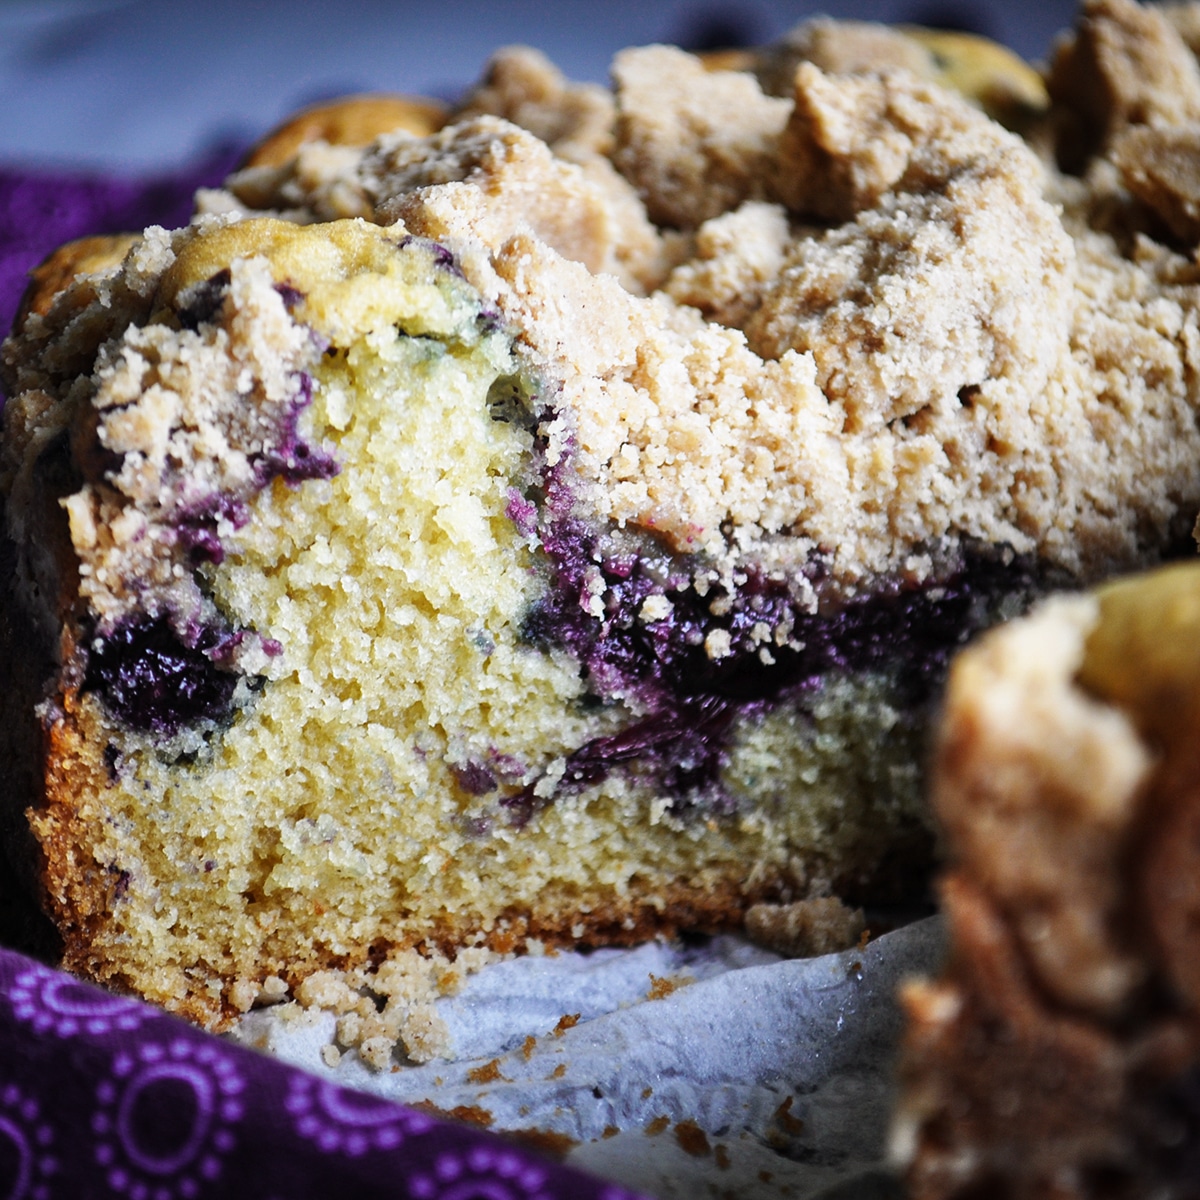 A blueberry coffee cake with one slice cut from it.